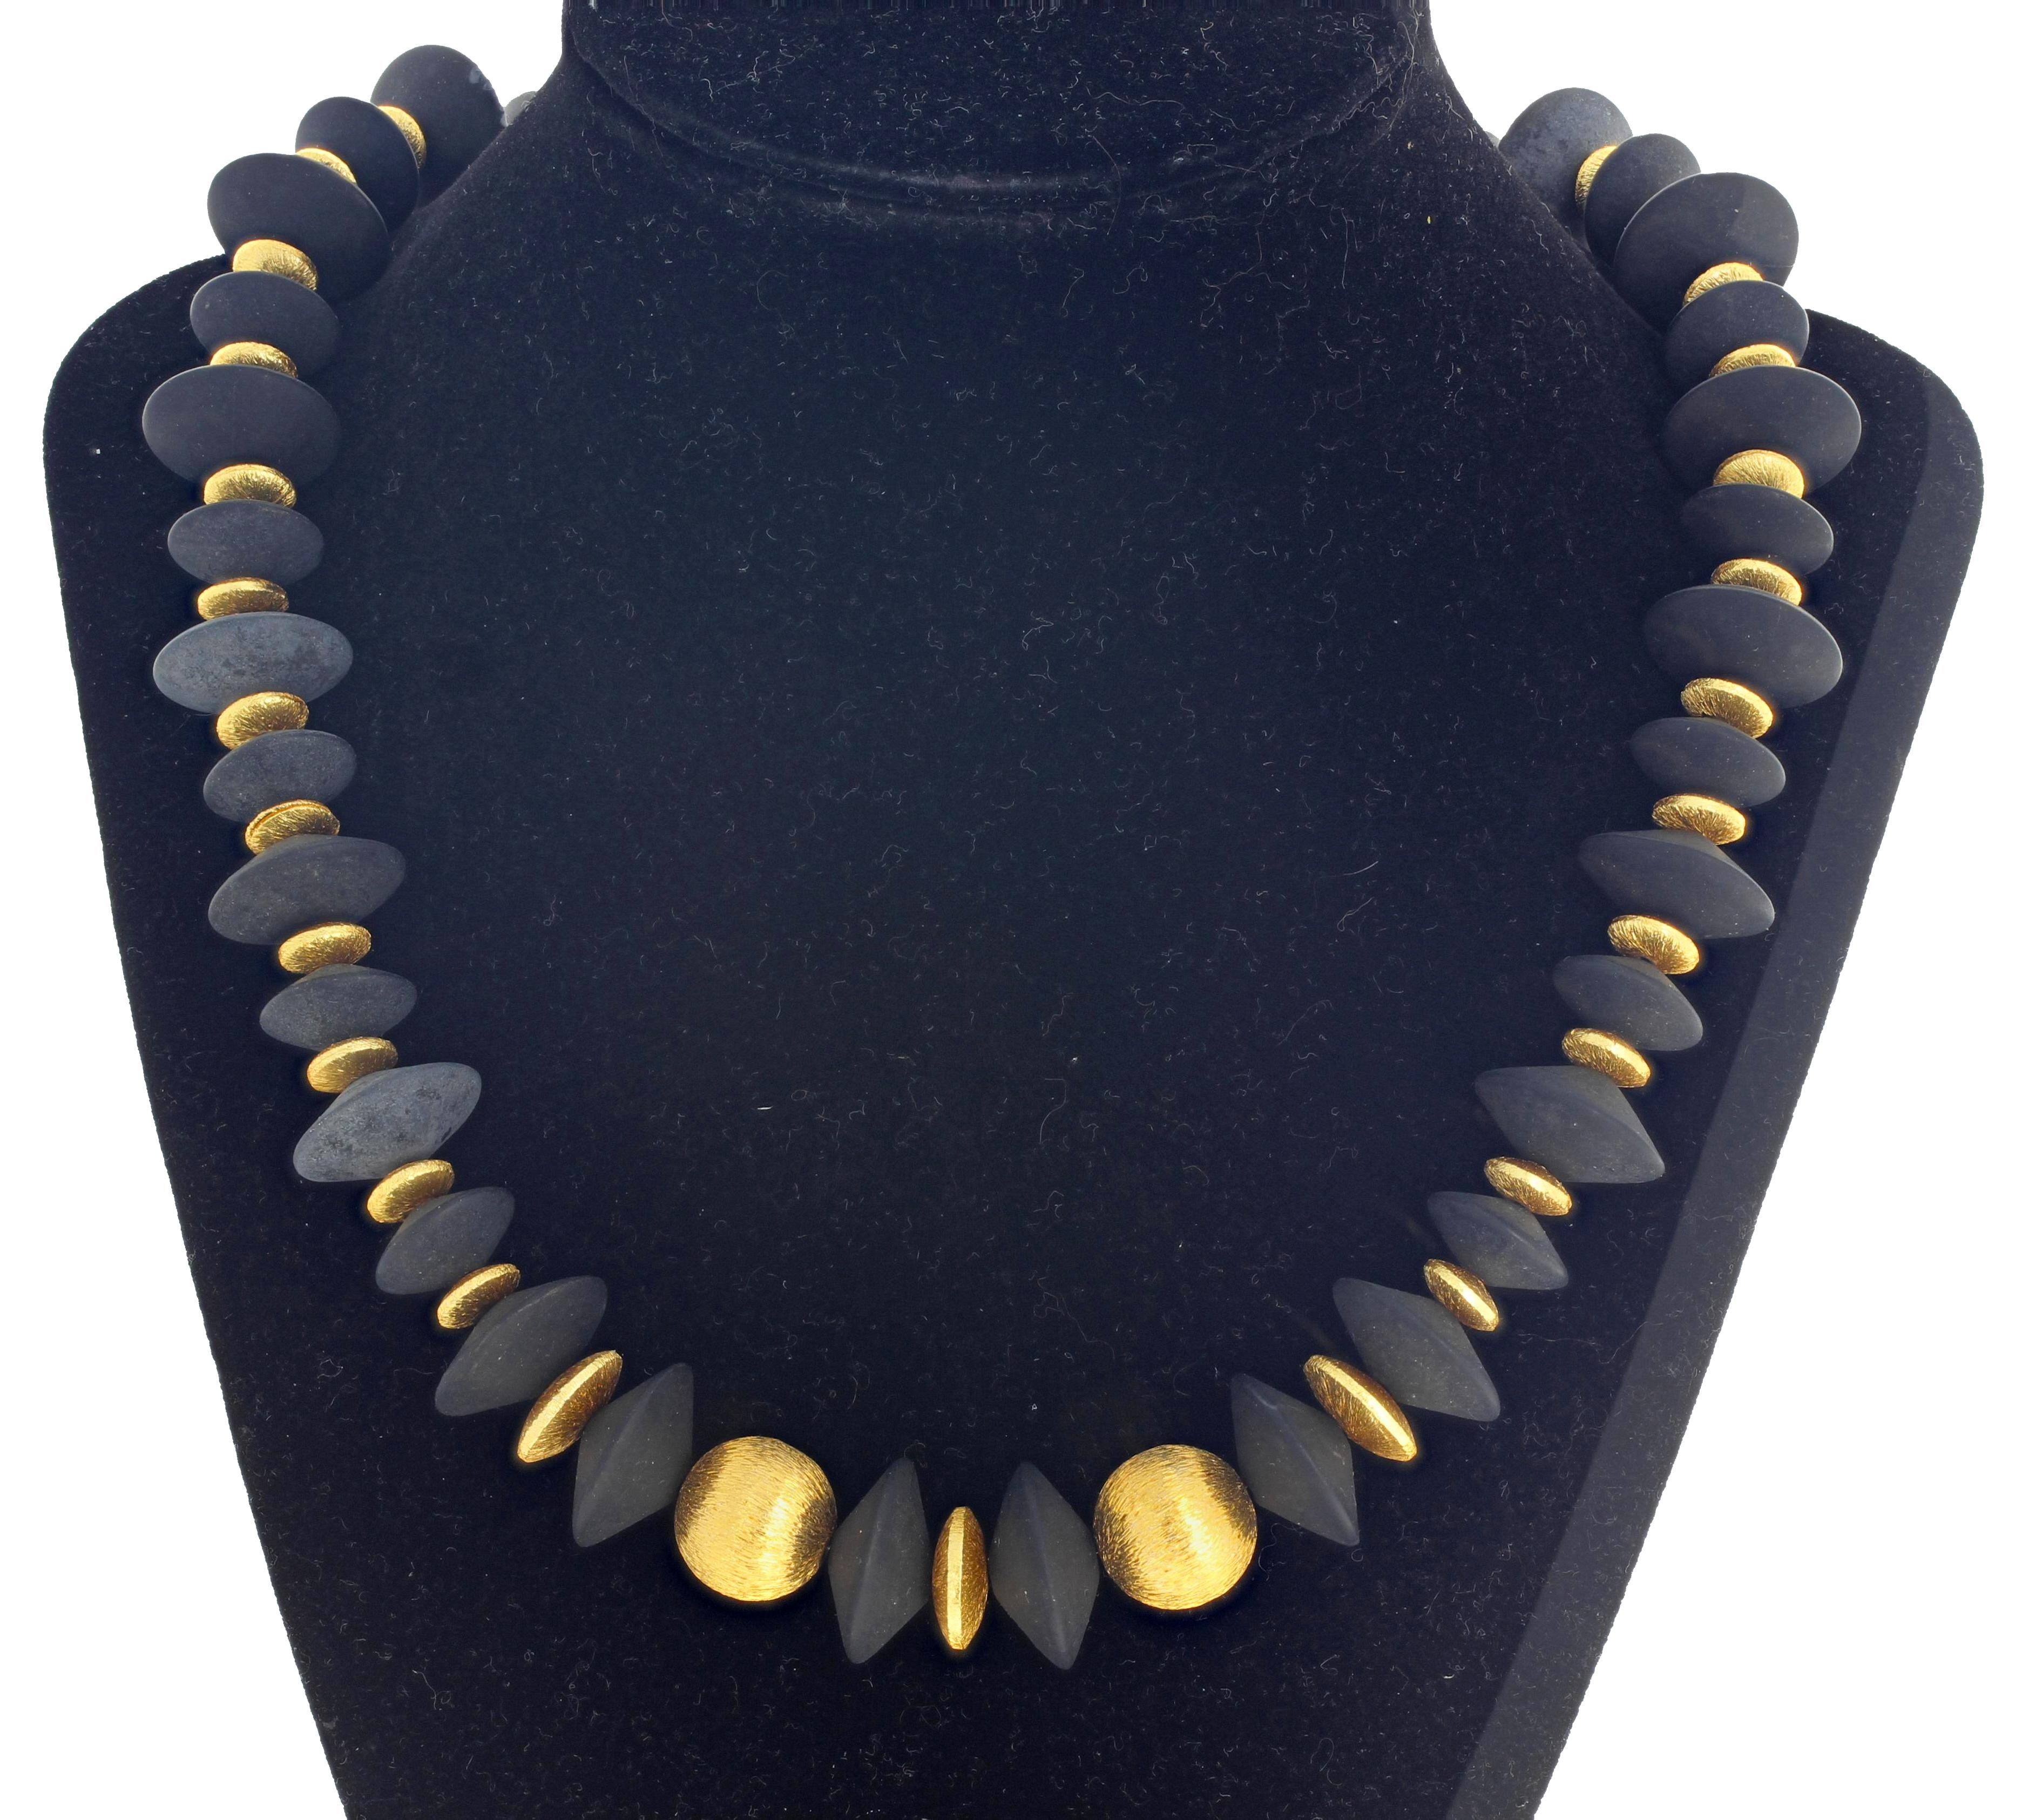 Unique Black Onyx and gold plated Rondels in this elegant formal 19.5 inch long necklace with a gold plated easy to use clasp.  The largest Onyx is 18 mm and the largest gold plated Rondel is 14.5 mm. This is hugely elegant both day and night.  